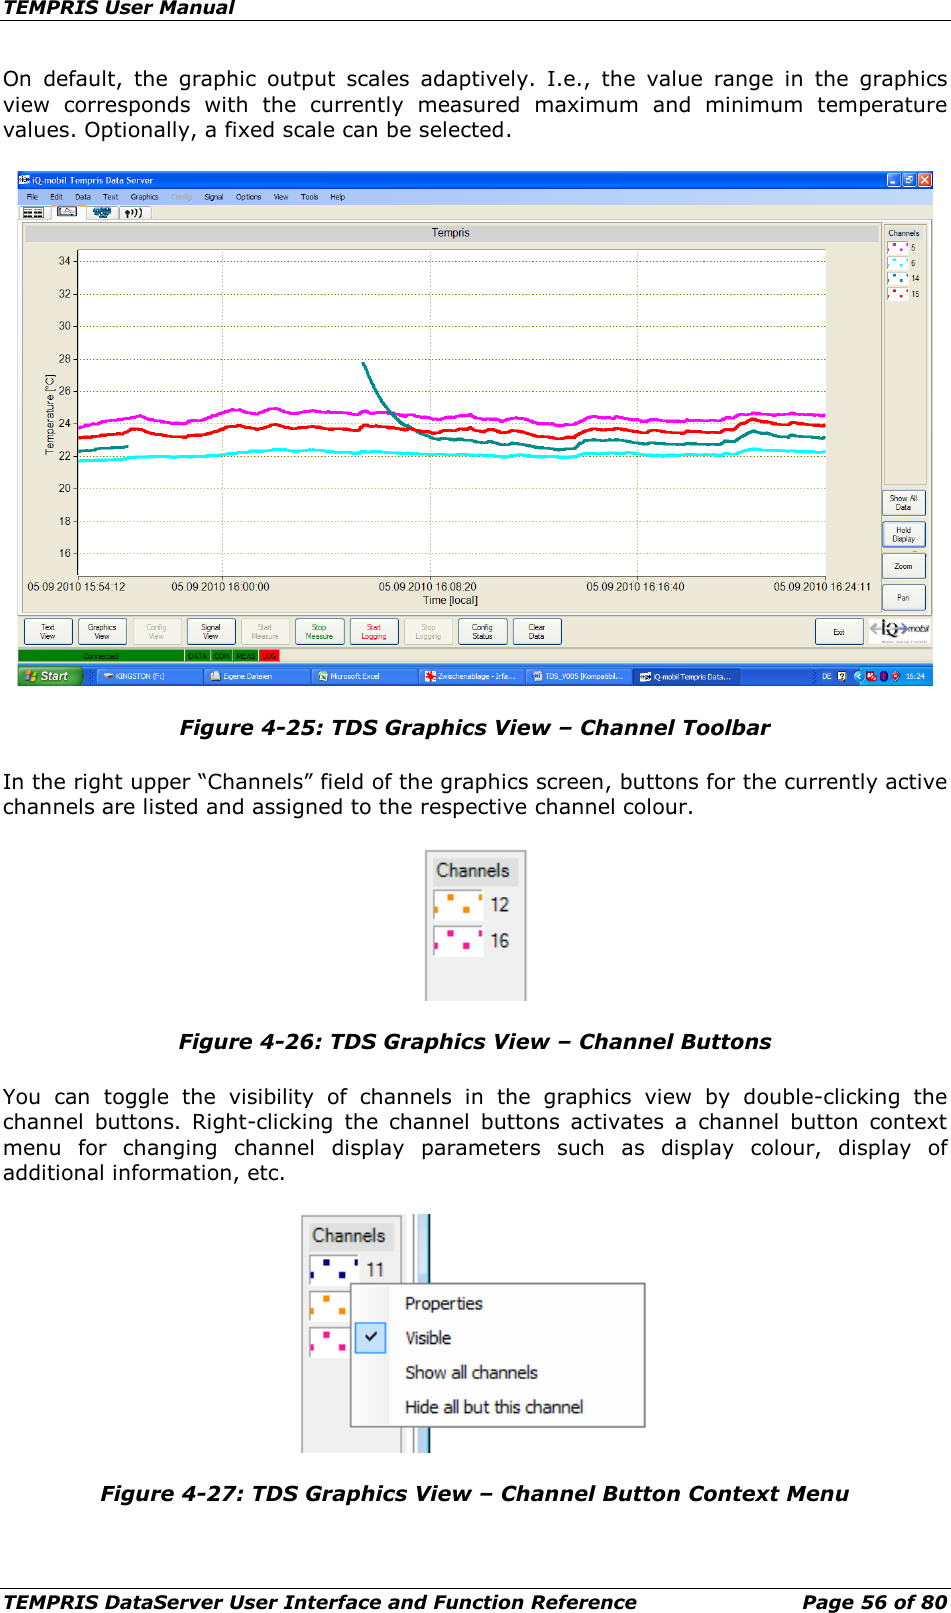 TEMPRIS User Manual TEMPRIS DataServer User Interface and Function Reference Page 56 of 80 On default, the graphic output scales adaptively. I.e.,  the  value range in the graphics view corresponds with the currently measured maximum and minimum  temperature values. Optionally, a fixed scale can be selected.  Figure 4-25: TDS Graphics View – Channel Toolbar In the right upper “Channels” field of the graphics screen, buttons for the currently active channels are listed and assigned to the respective channel colour.  Figure 4-26: TDS Graphics View – Channel Buttons You can toggle  the visibility of channels in the graphics view by double-clicking the channel buttons. Right-clicking the channel buttons activates a channel button context menu for changing channel display parameters such as display colour, display of additional information, etc.  Figure 4-27: TDS Graphics View – Channel Button Context Menu    